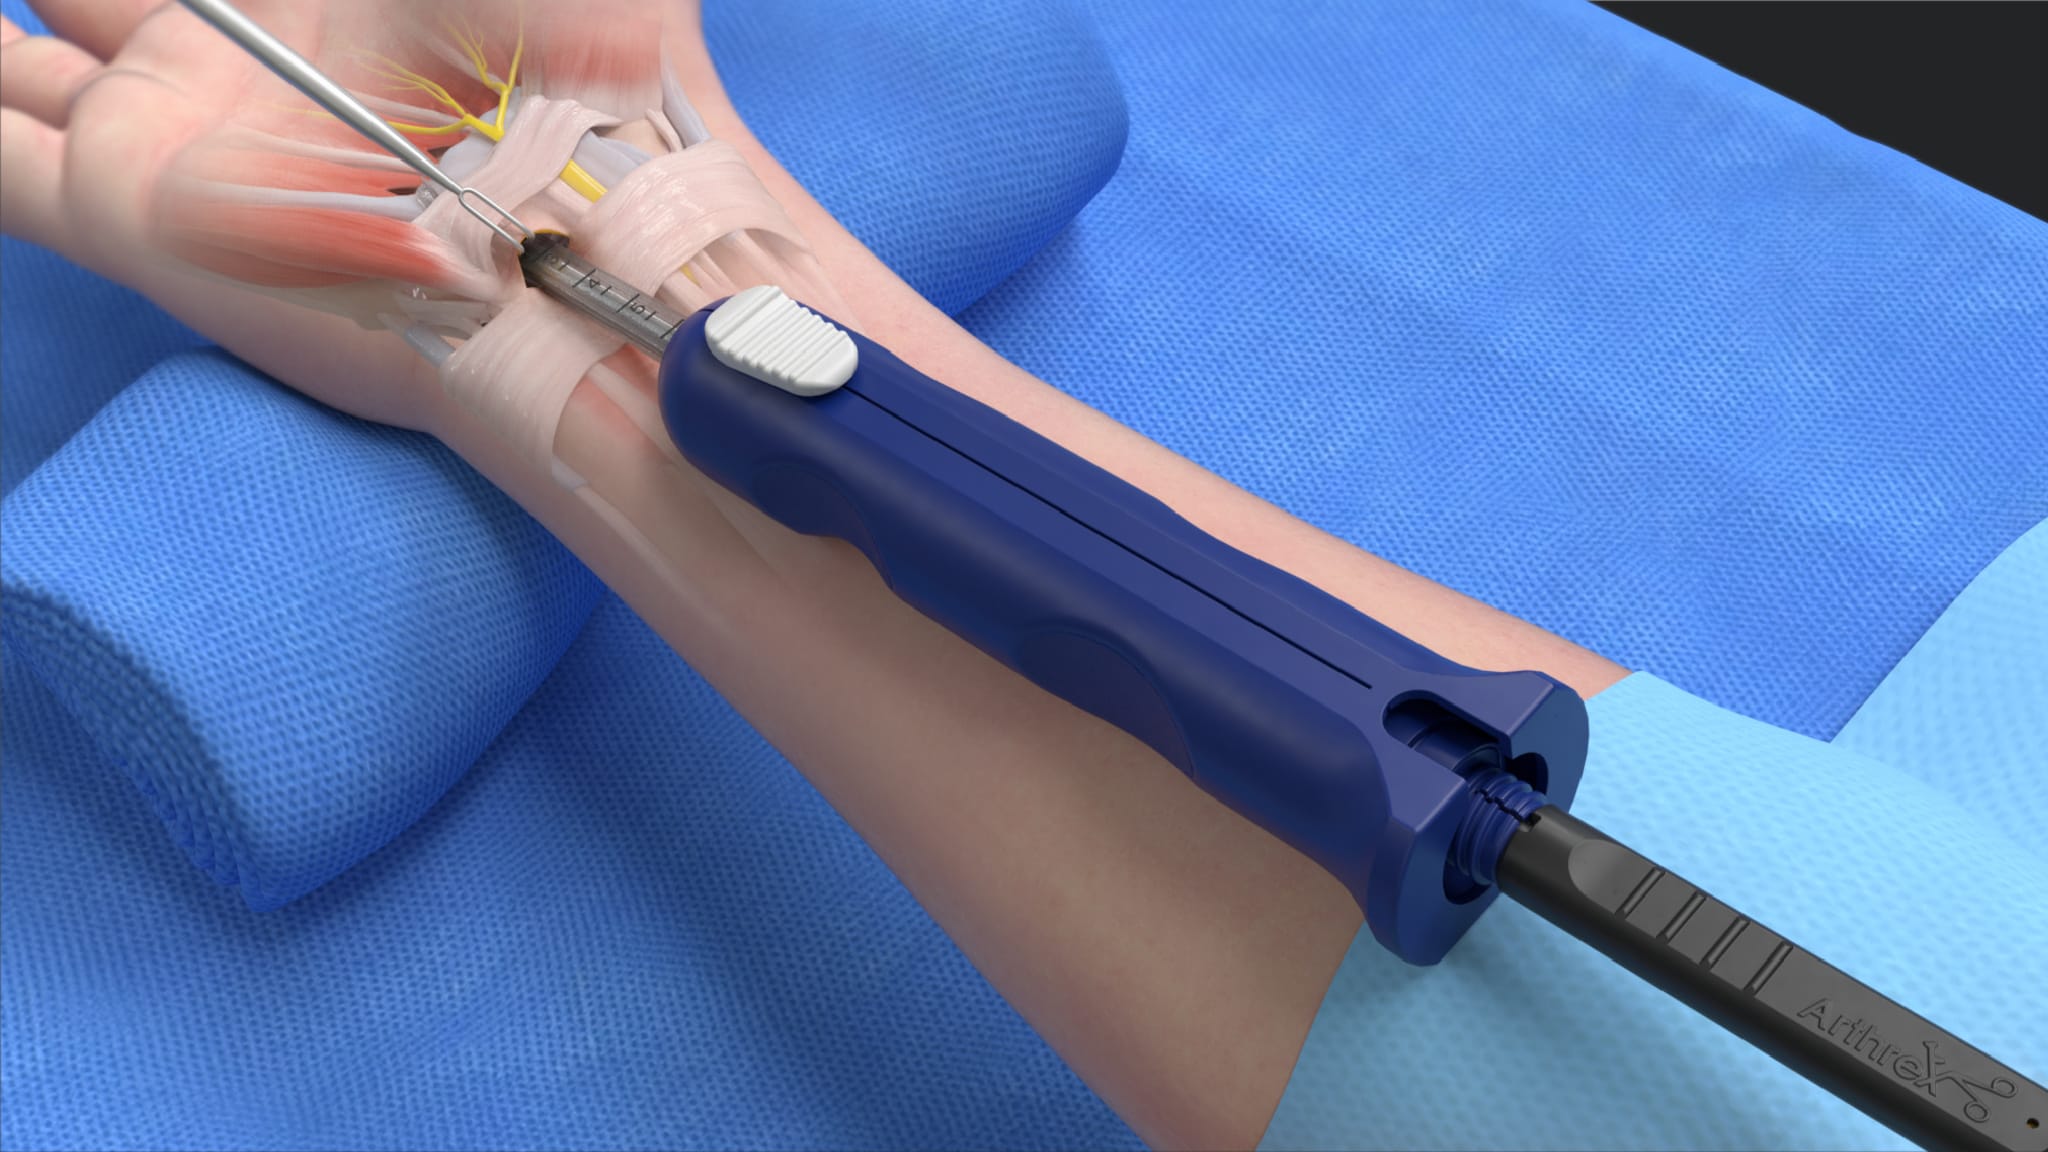 NanoScopic™ Release System for Endoscopic Carpal Tunnel Release